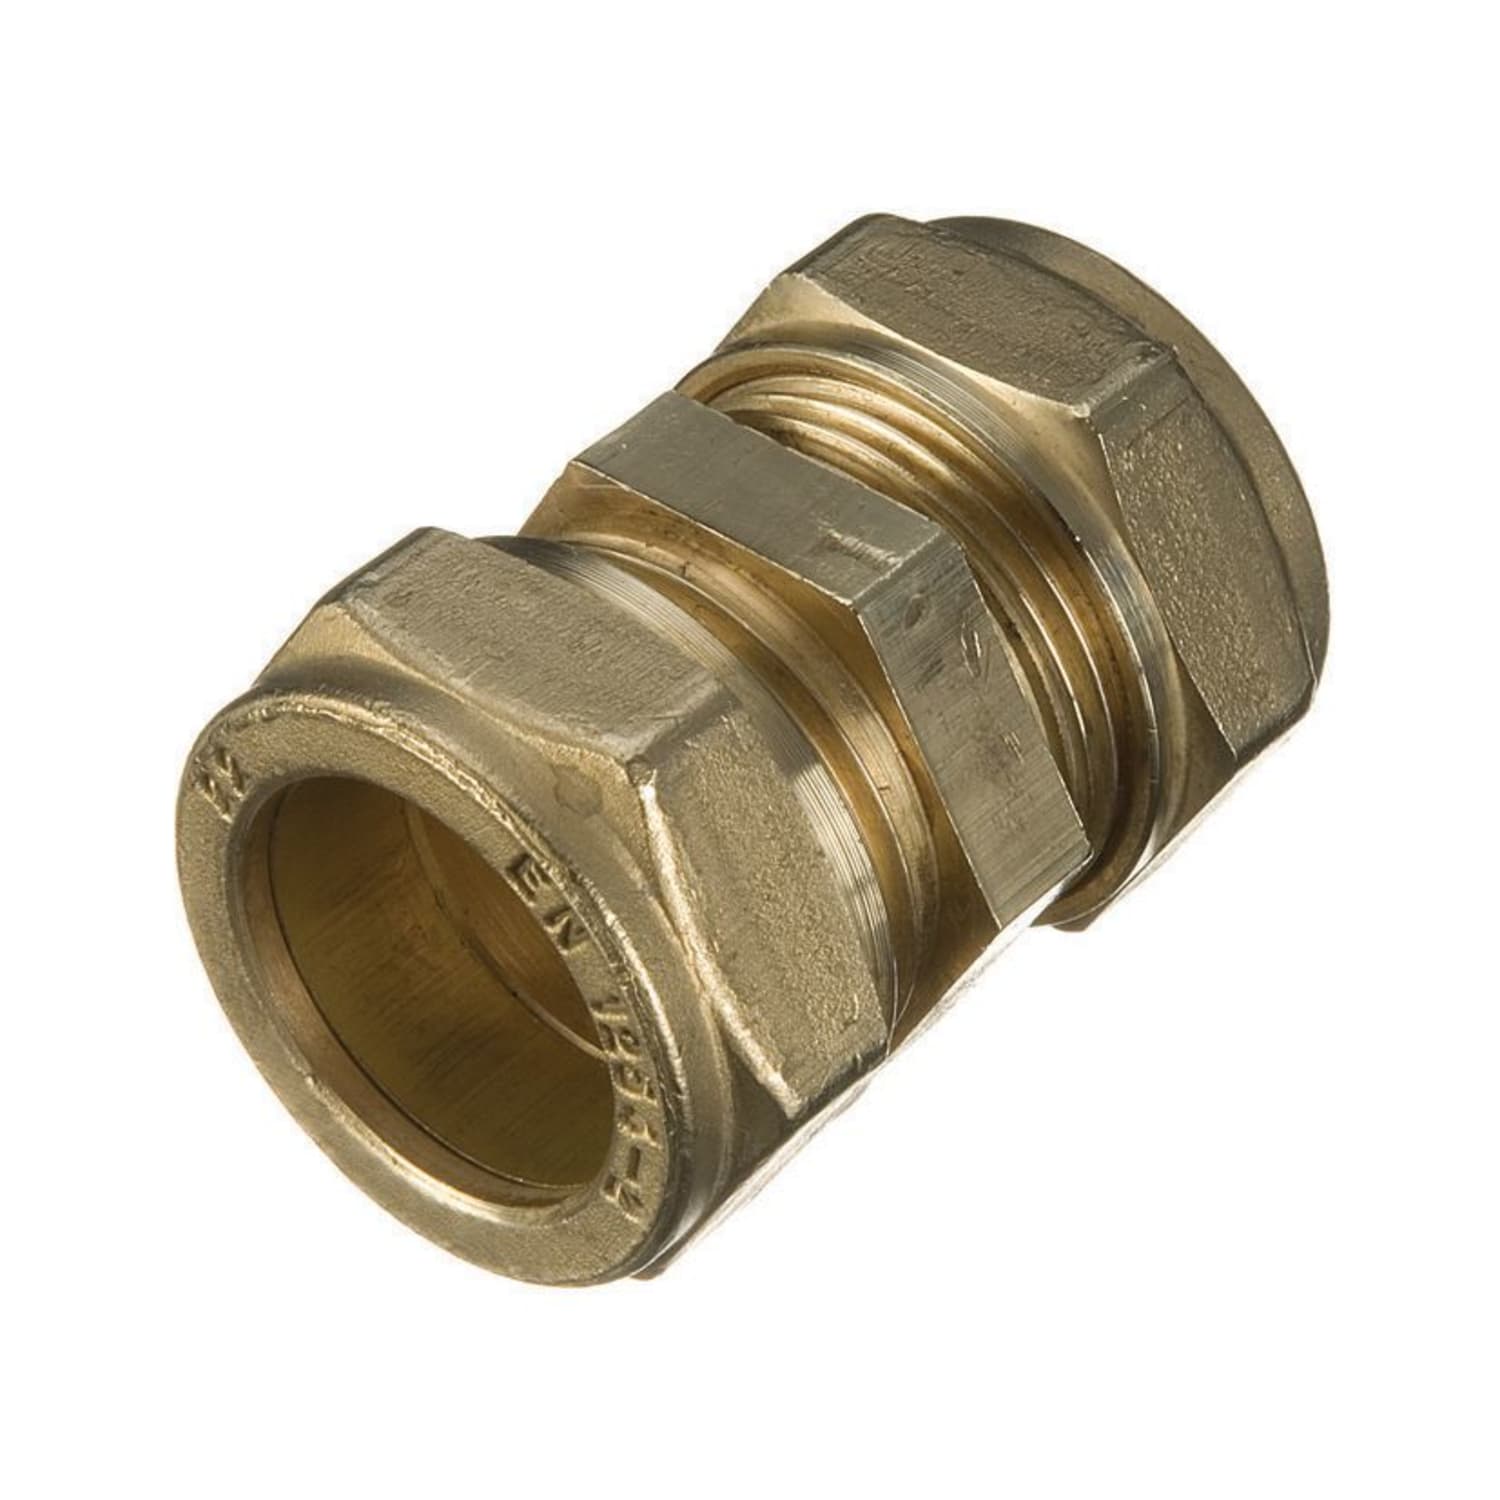 8mm STRAIGHT COMPRESSION EQUAL FITTING GAS TUBE CONNECTOR COPPER PIPE  COUPLING